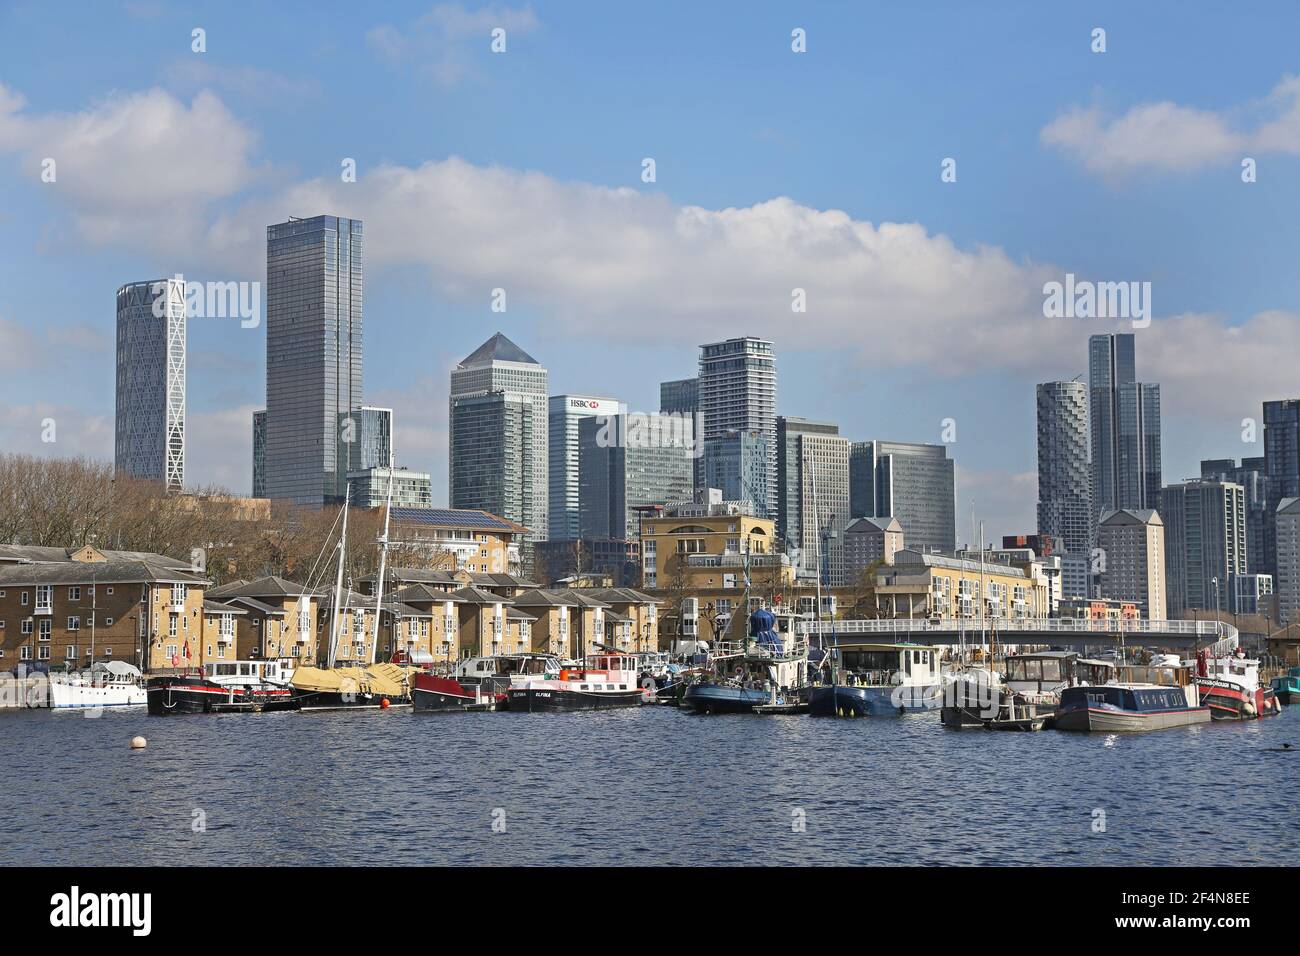 Houseboats in Greenland Dock, Rotherhithe, London, UK. Part of the  old Surrey Docks redeveloped in the 1980s. Canary Wharf towers in the background. Stock Photo